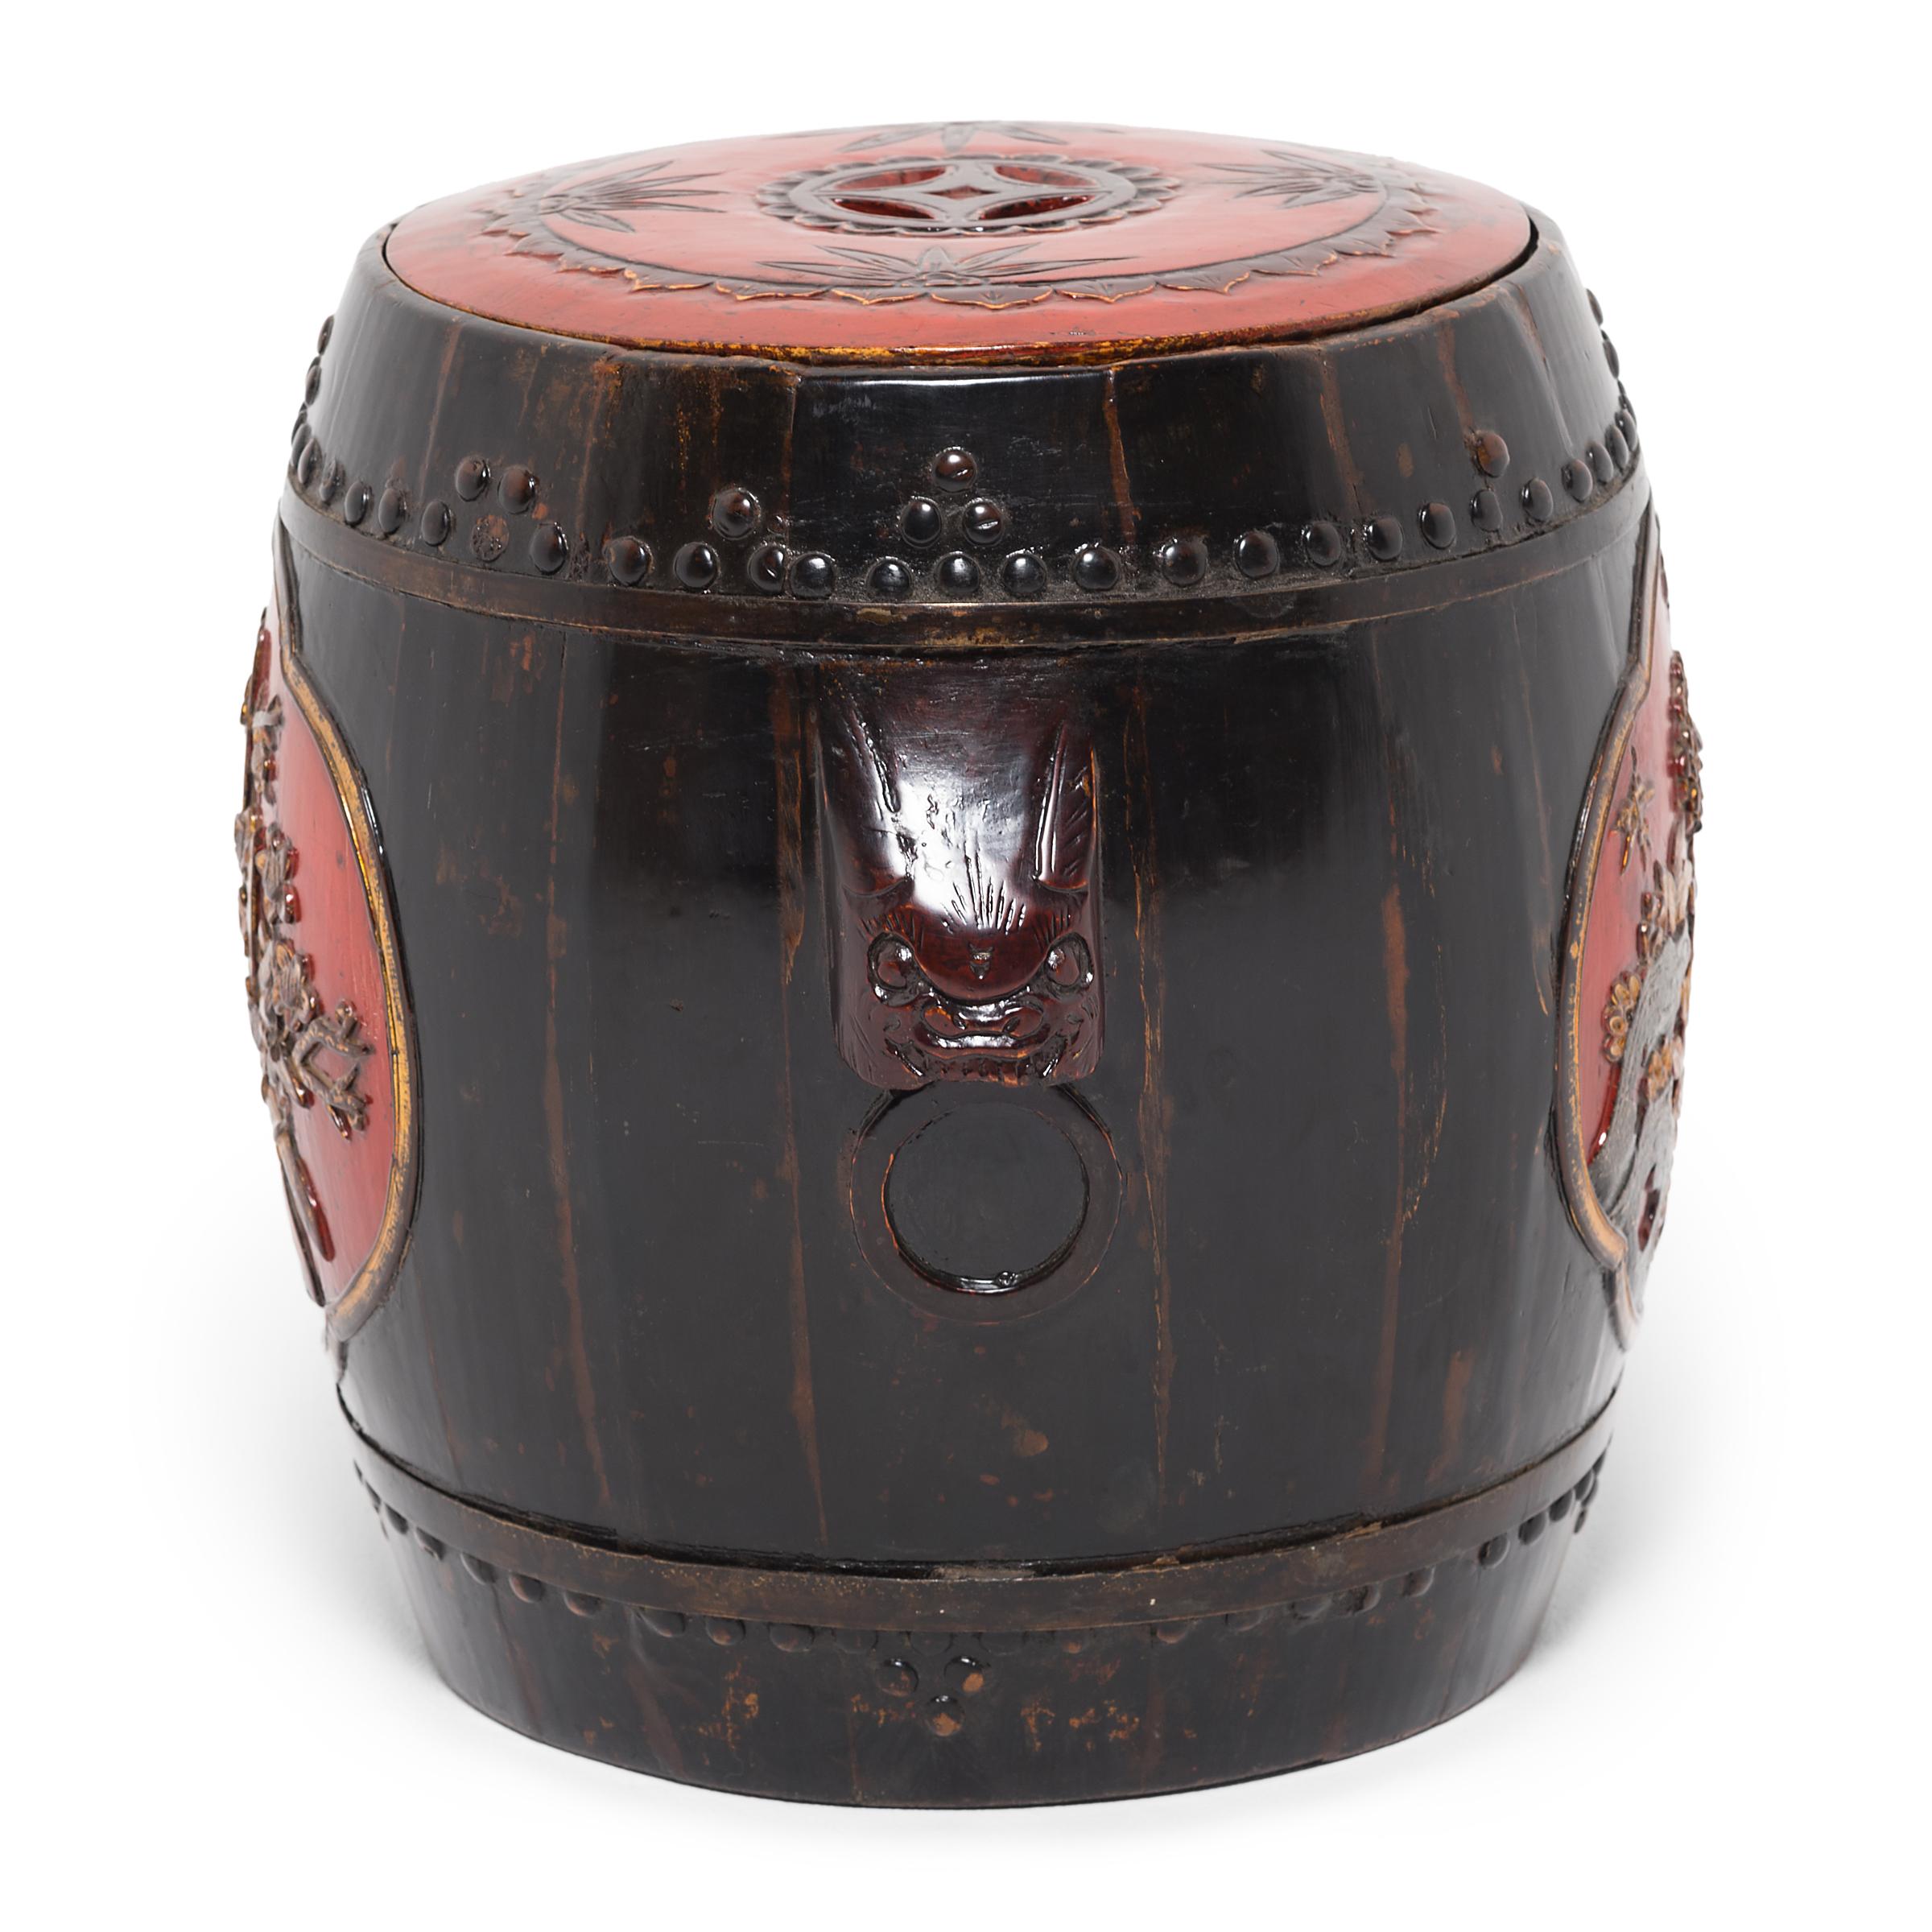 Carved Chinese Painted Drum Stool with Blessings, c. 1850 For Sale